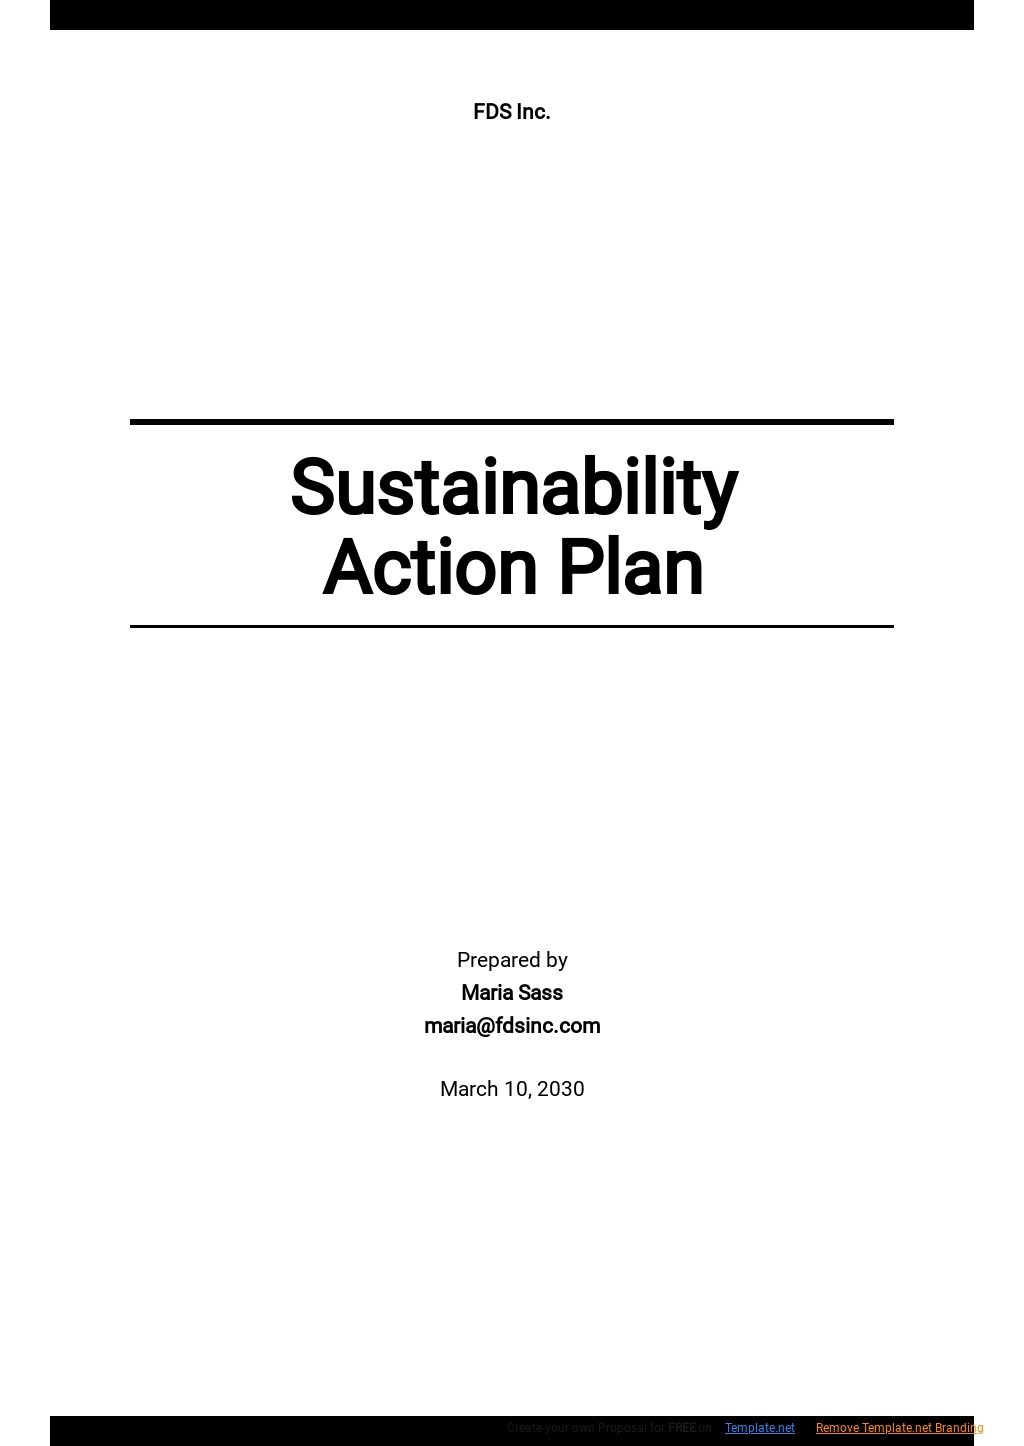 Sustainability Action Plan Template Google Docs, Word, Apple Pages